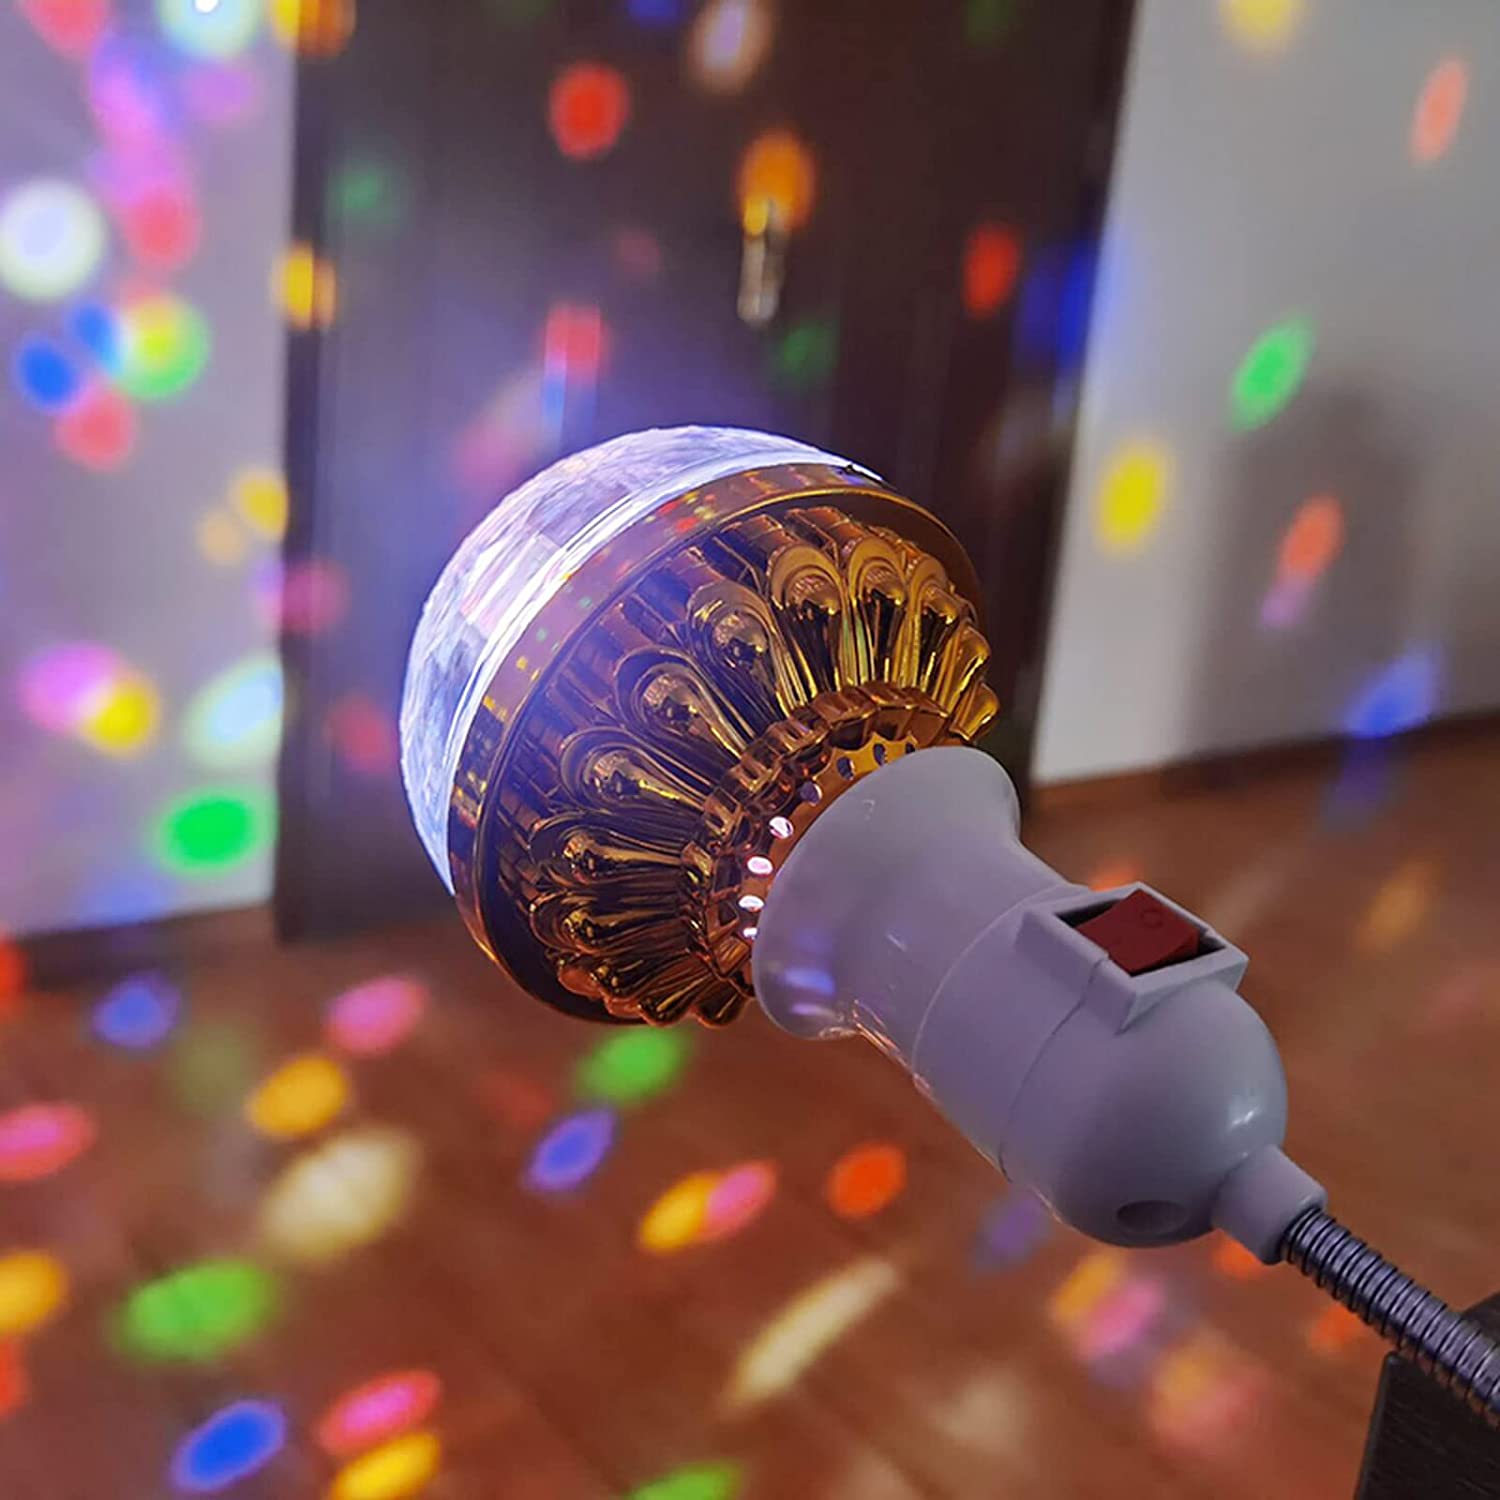 (New In-Buy 2 Save 10%) Colorful Rotating Magic Ball Light